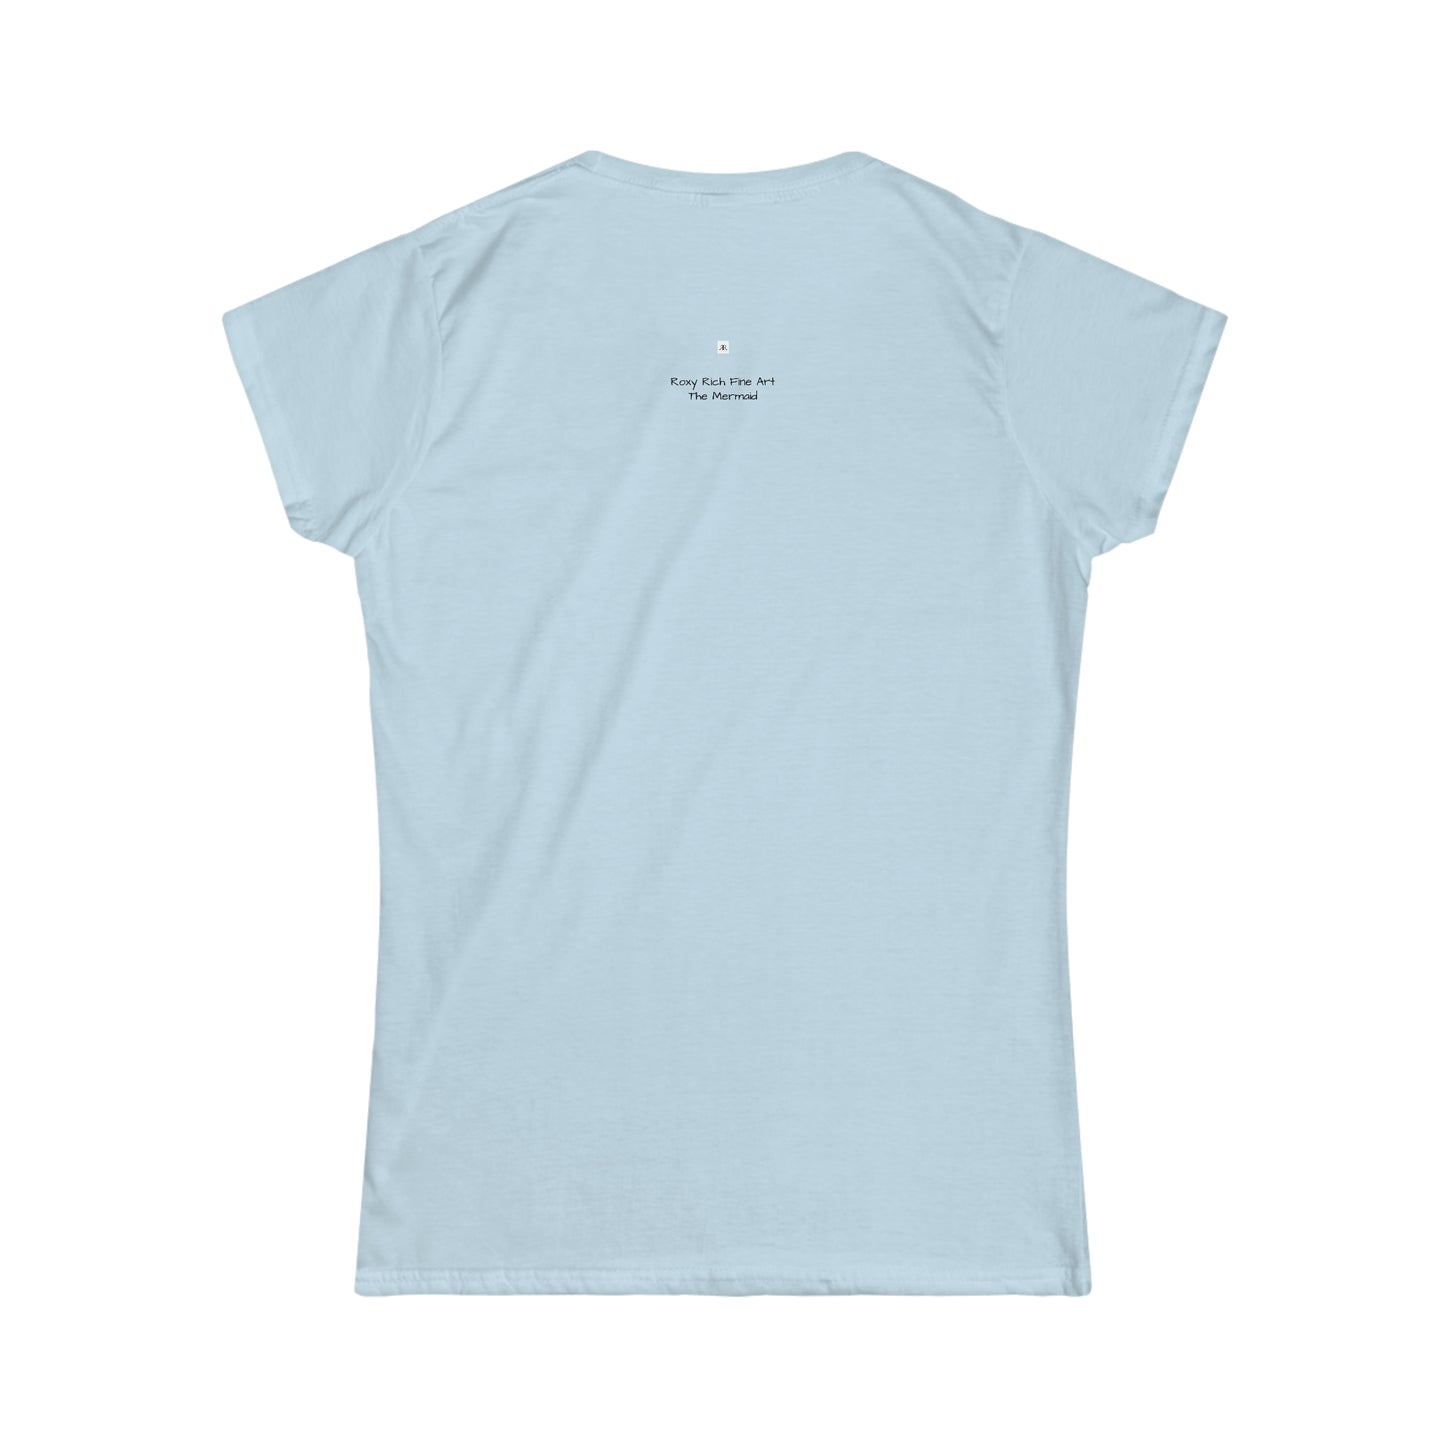 The Mermaid Women's Softstyle  Semi-Fitted Tee